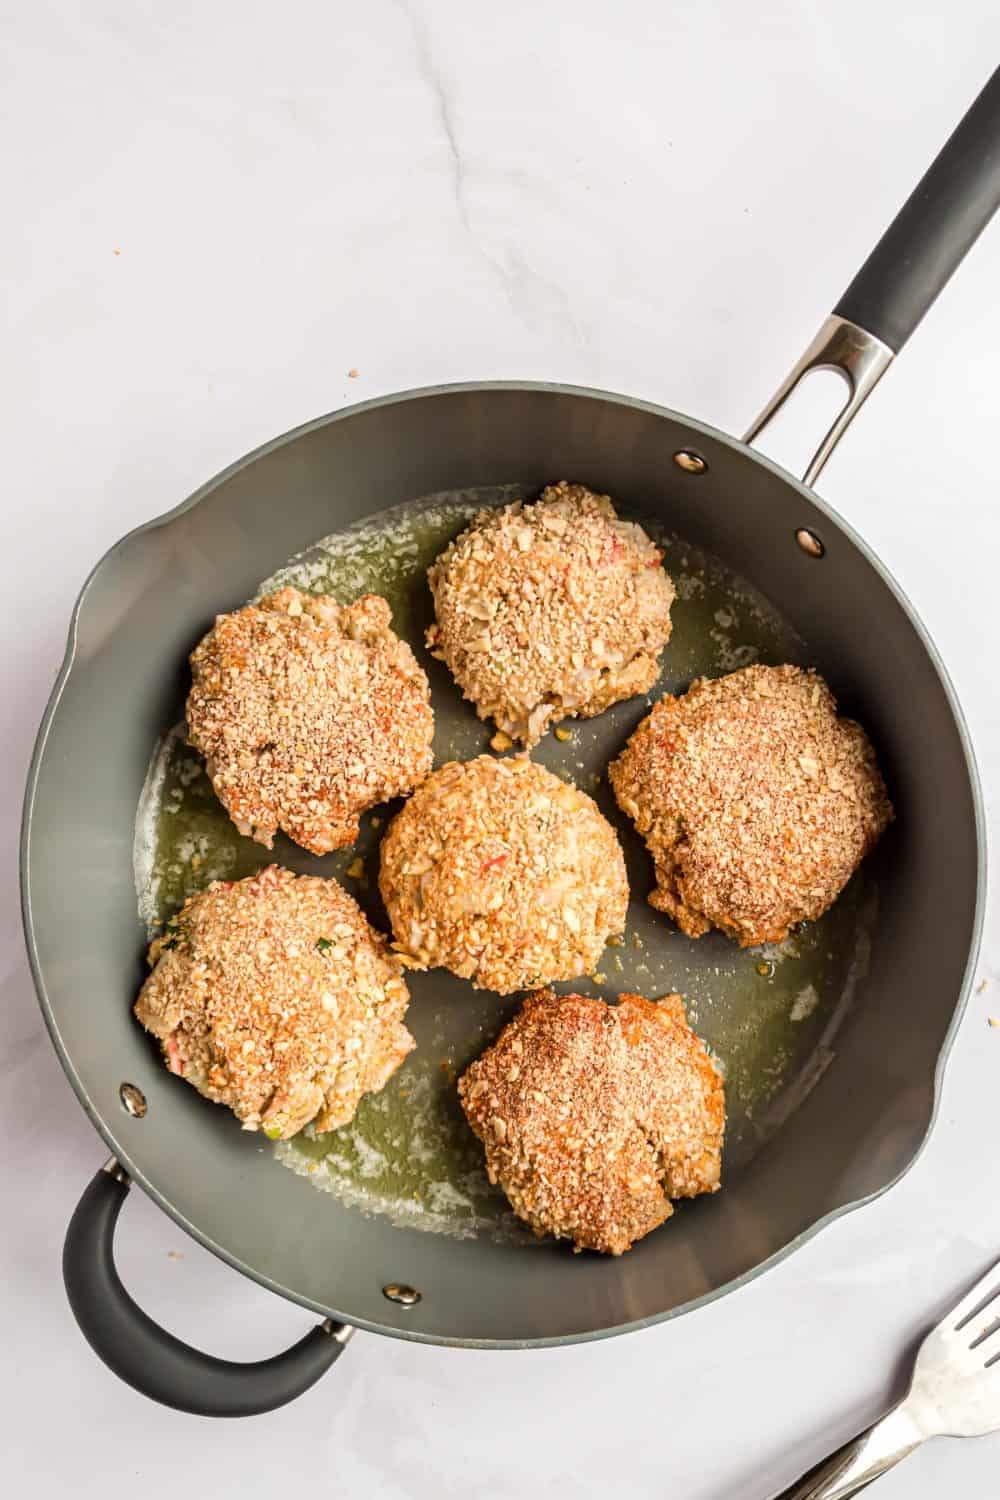 Crab cakes cooking in a skillet.